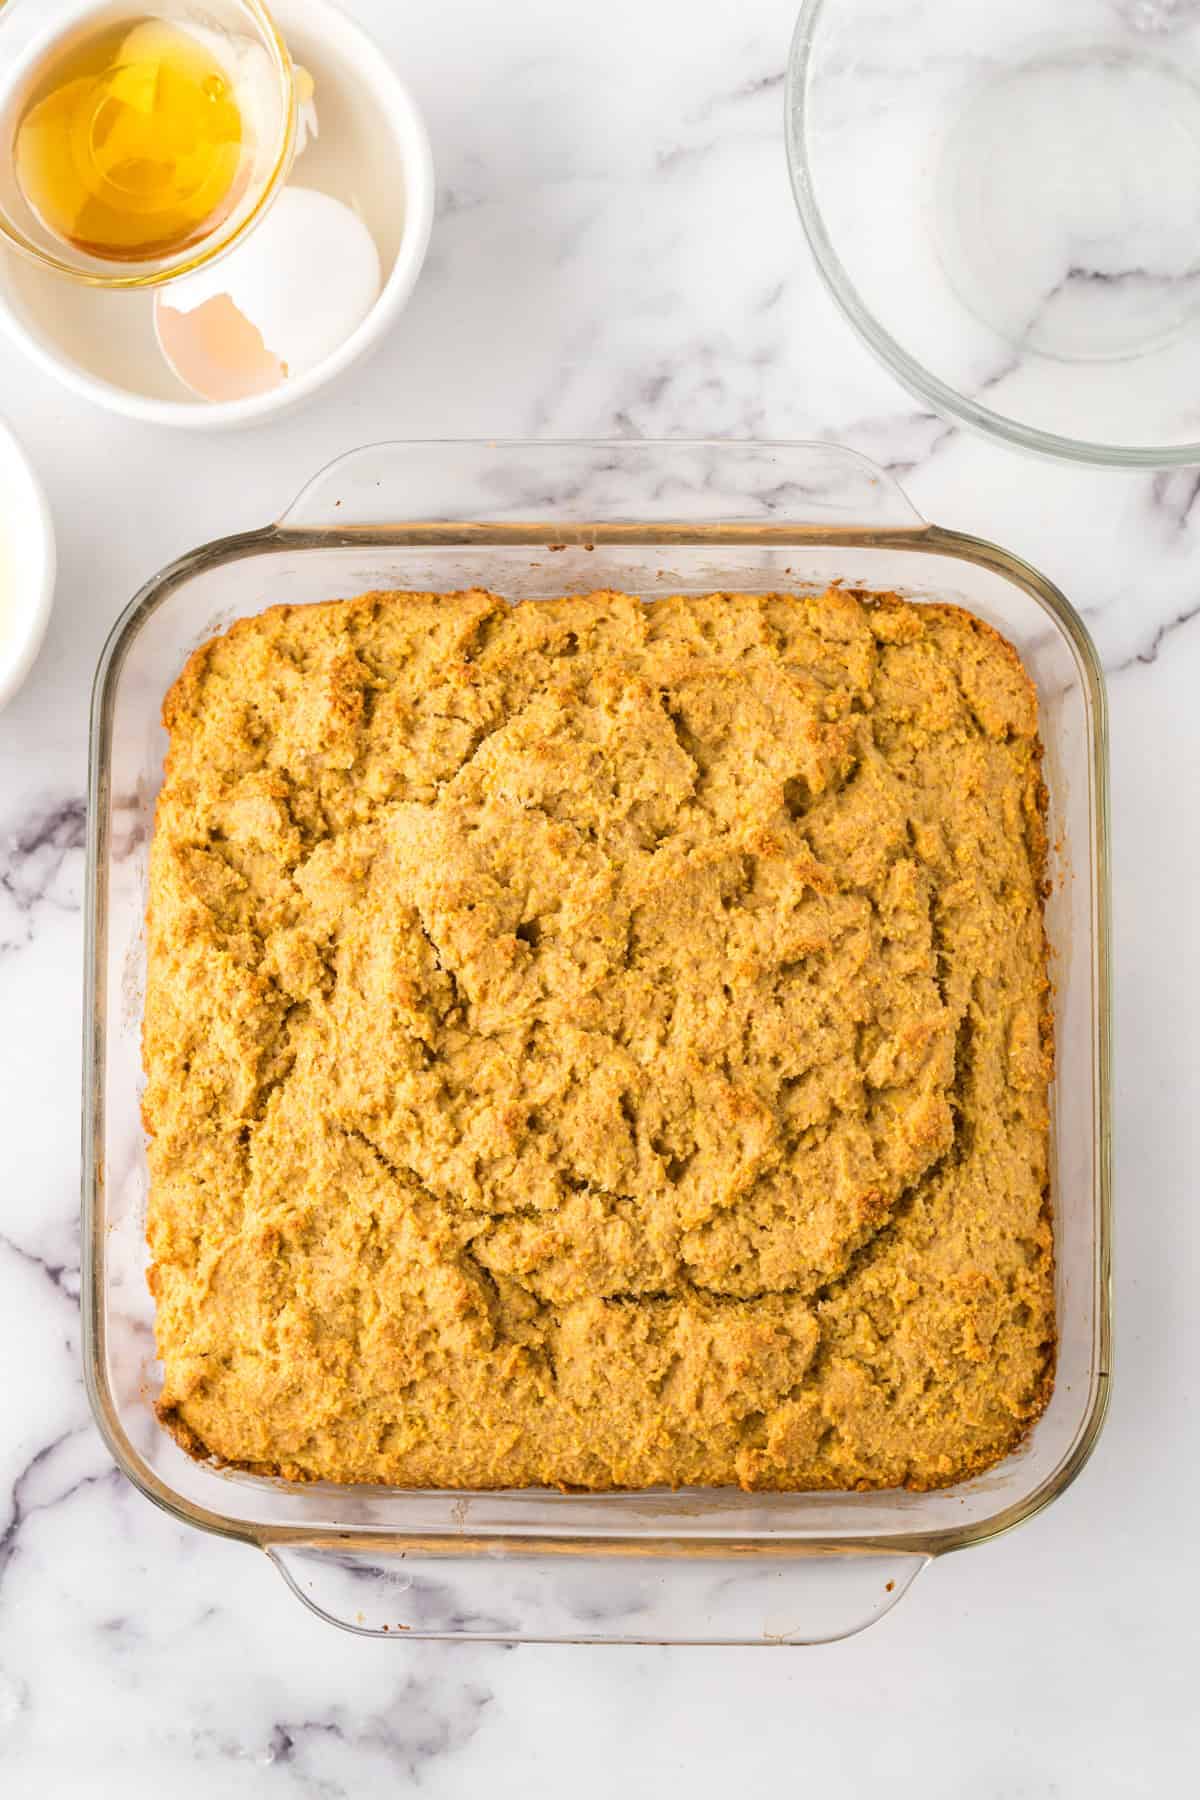 clear baking dish with whole wheat cornbread fresh out of the oven.